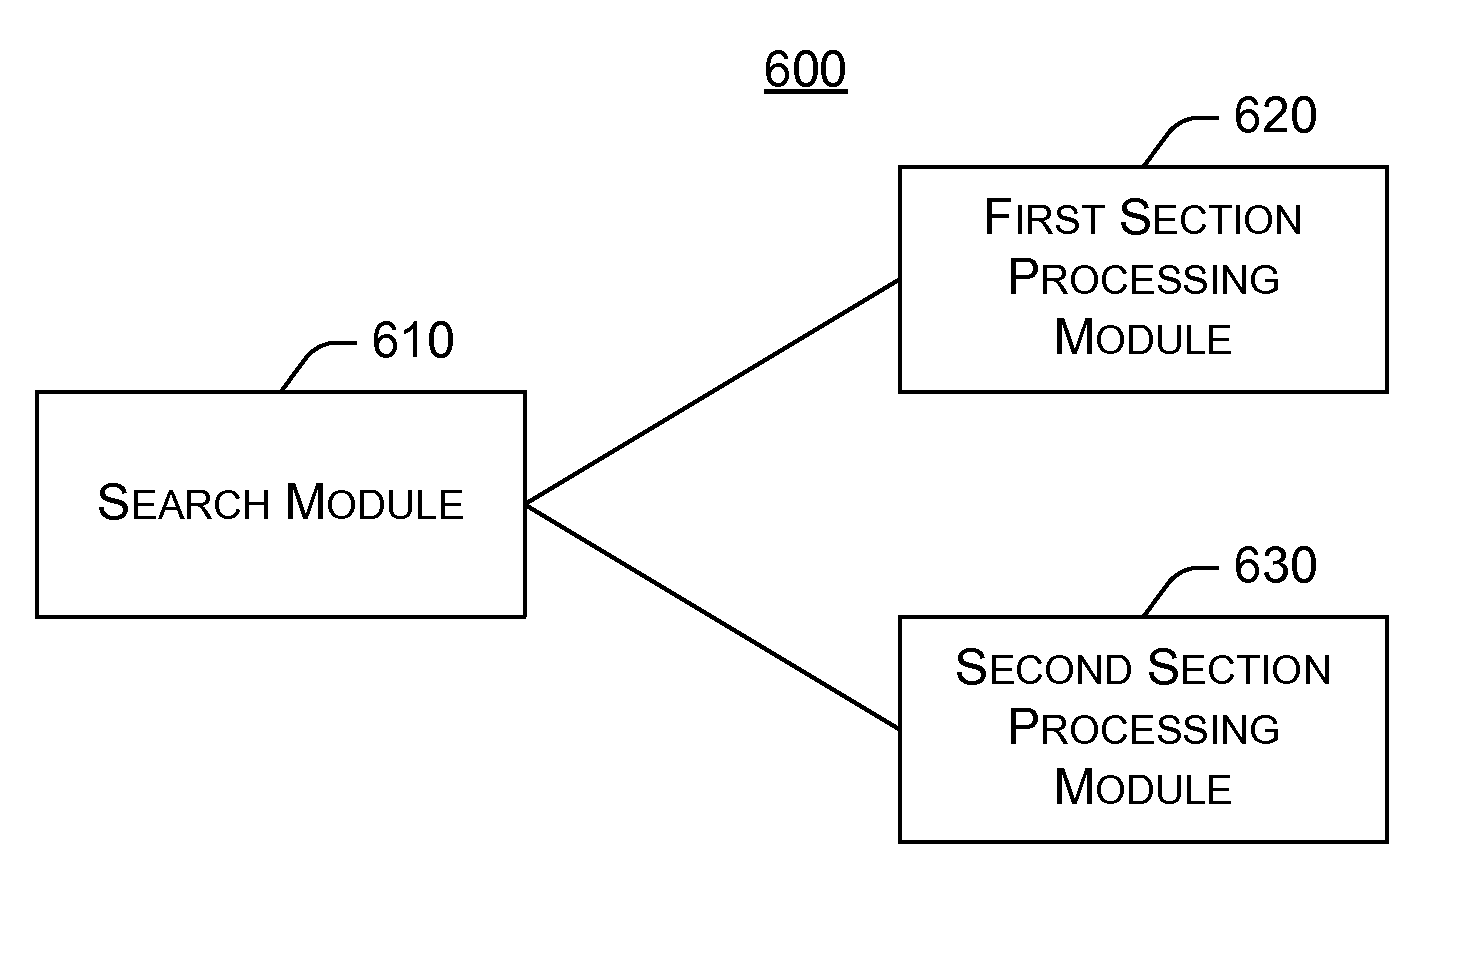 Method for Generating Search Results and System for Information Search